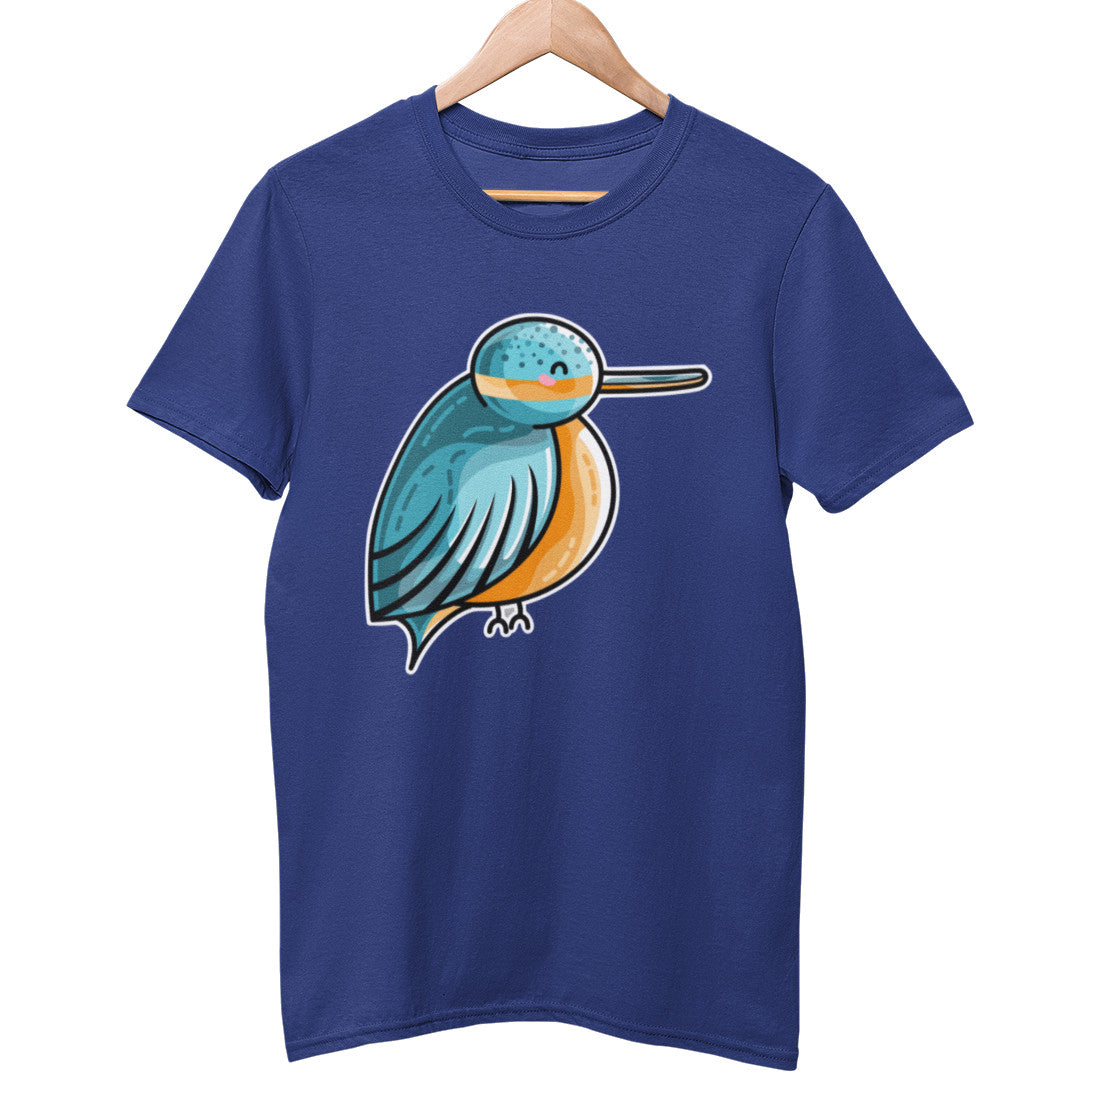 A blue colour unisex crewneck t-shirt on a hanger with a design on its chest of a kawaii cute kingfisher with wings furled seen sideways looking to the right